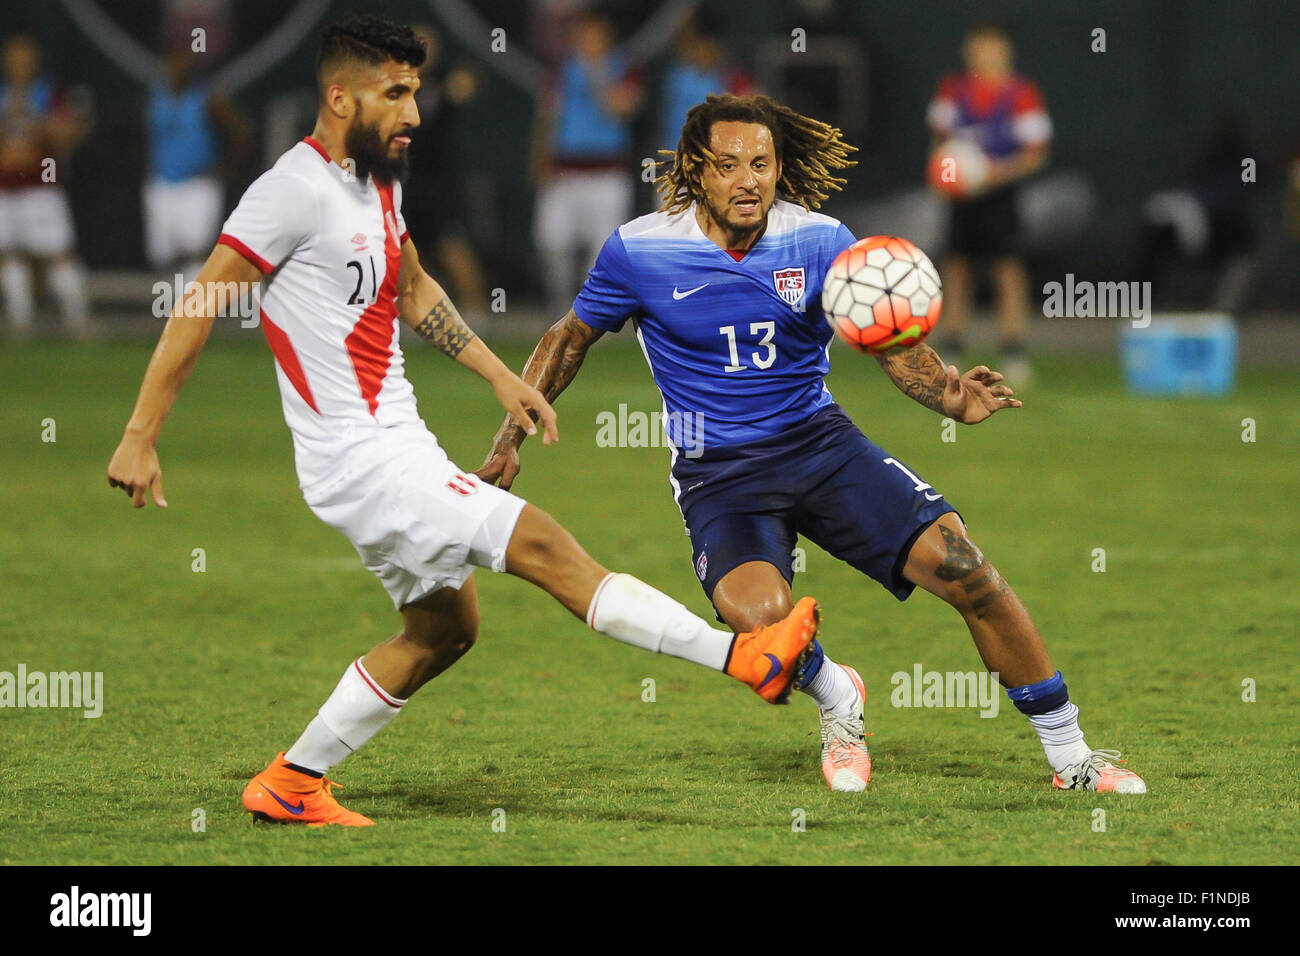 Washington, D.C, USA. 4th Sep, 2015. JERMAINE JONES of the USA tries to control the ball during an international friendly between the United States and Peru at RFK Stadium in Washington, DC. Credit:  Kyle Gustafson/ZUMA Wire/Alamy Live News Stock Photo